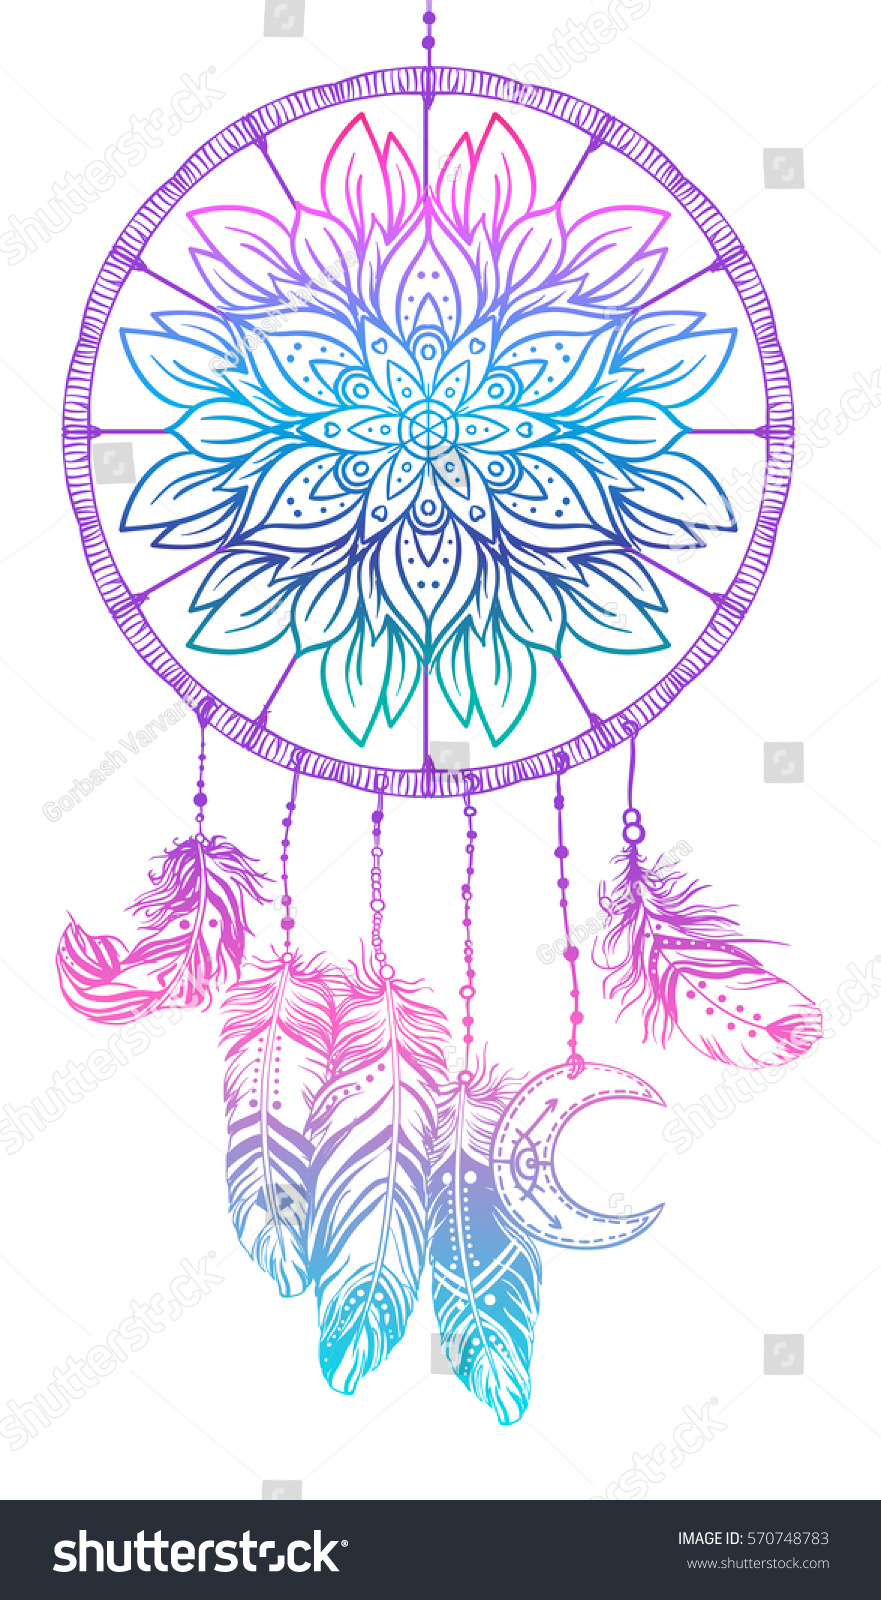 SVG of Hand drawn Native American Indian talisman dream catcher with mandala round pattern, feathers, moon. Vector hipster illustration isolated on white. Ethnic design, boho, dreamcatcher tribal symbol.  svg